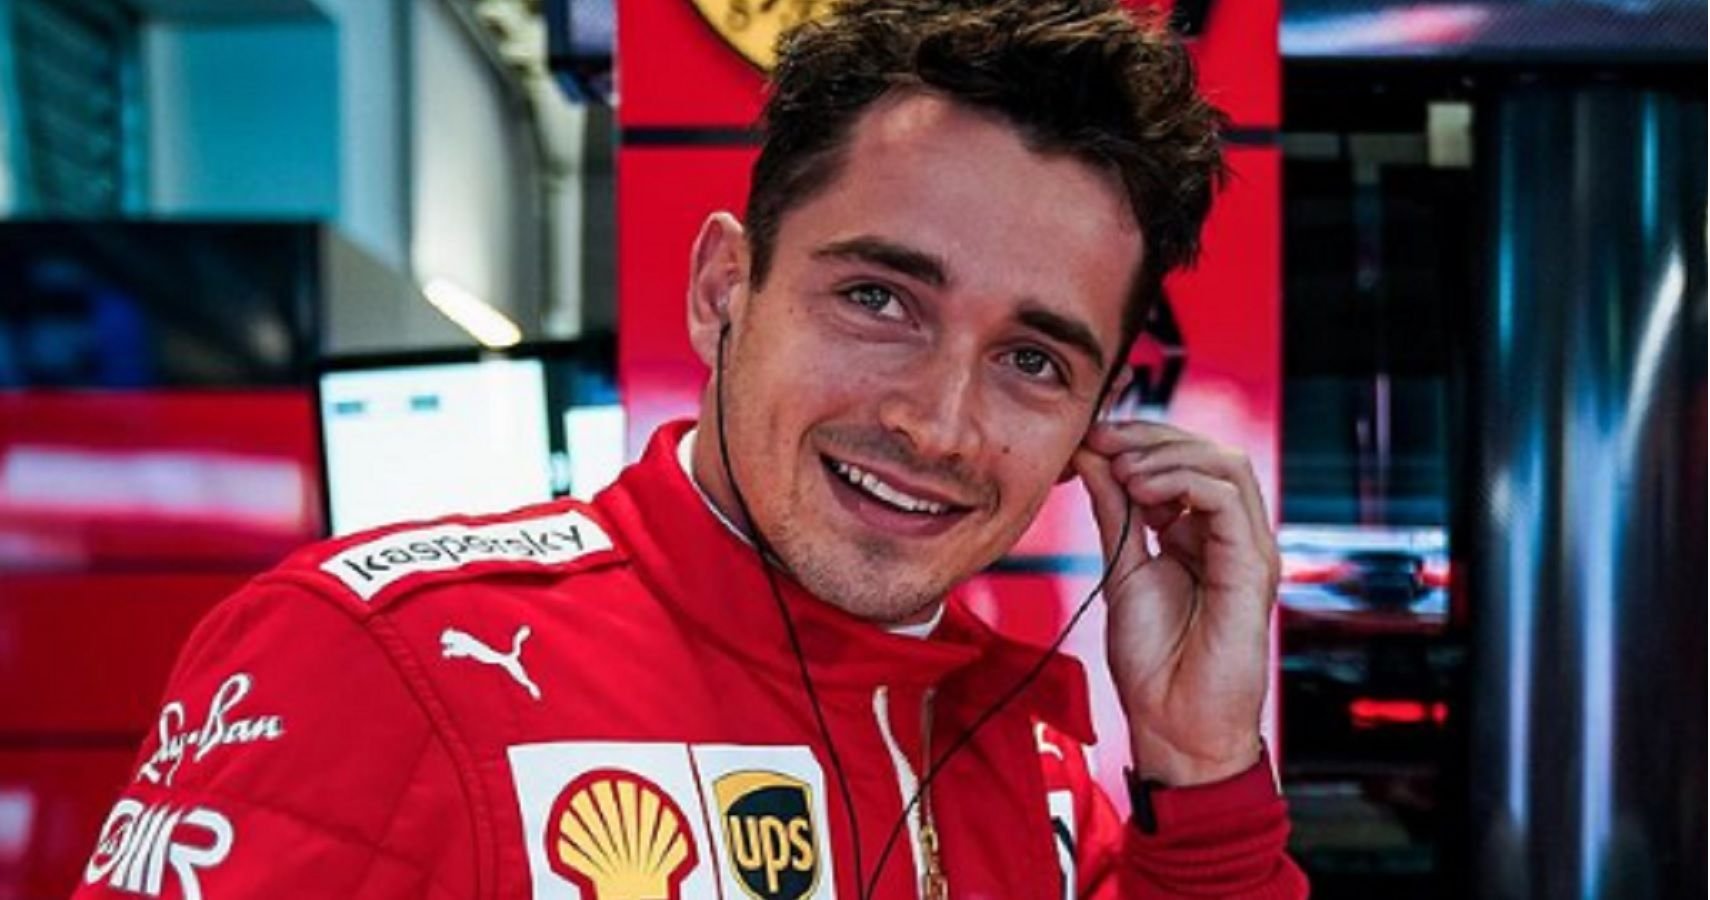 The Bahrain Grand Prix Winner: Here's How Charles Leclerc Became An F1 Star